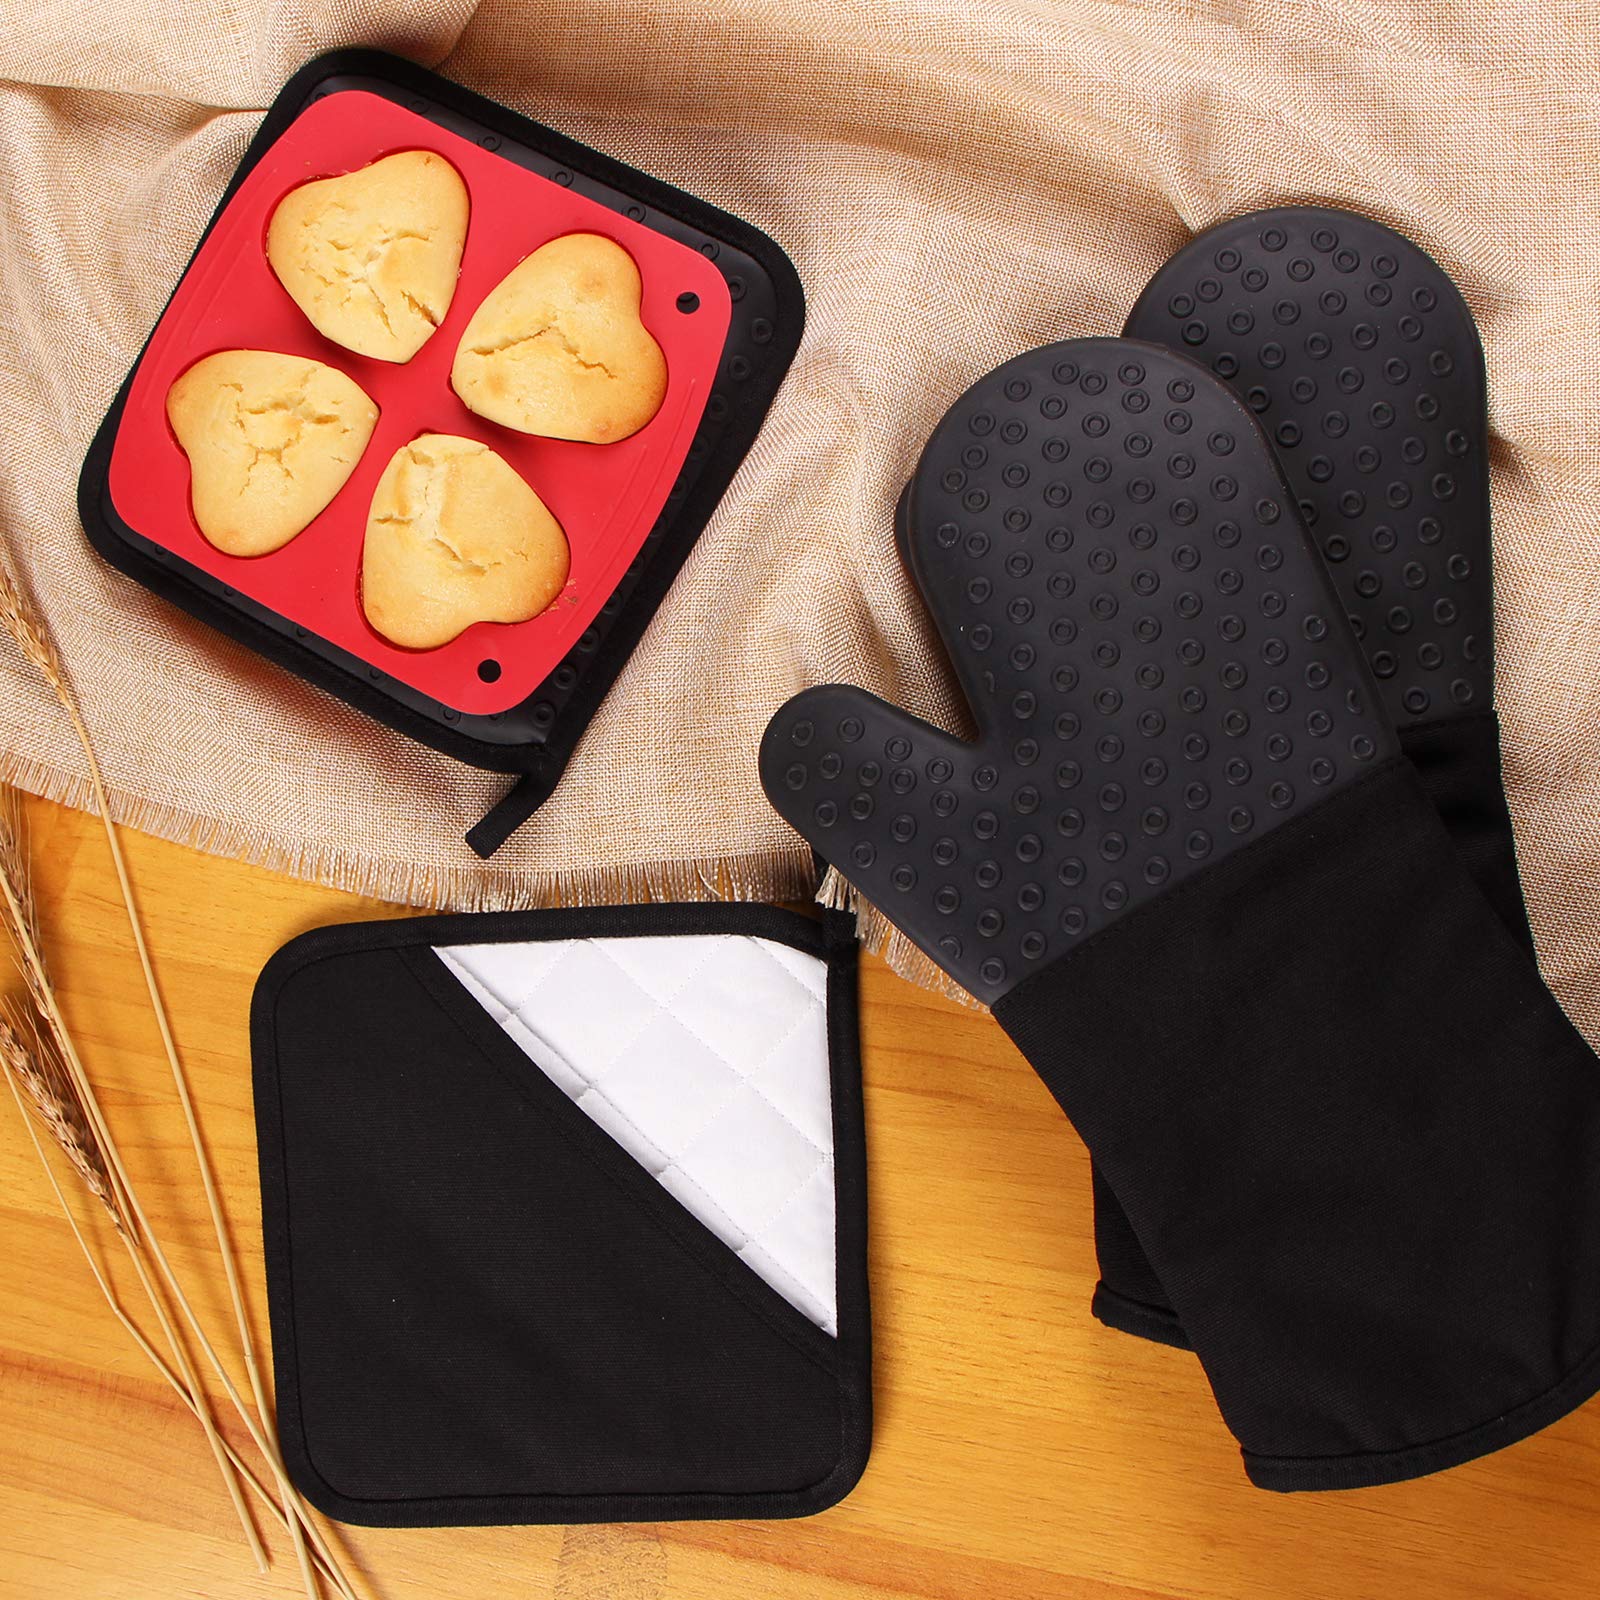 Webake Oven Mitts and Pot Holders Set of 4, 2 pcs Long Silicone Baking Oven Gloves and 2 pcs Silicone Hot Pads with Pocket for Oven Baking